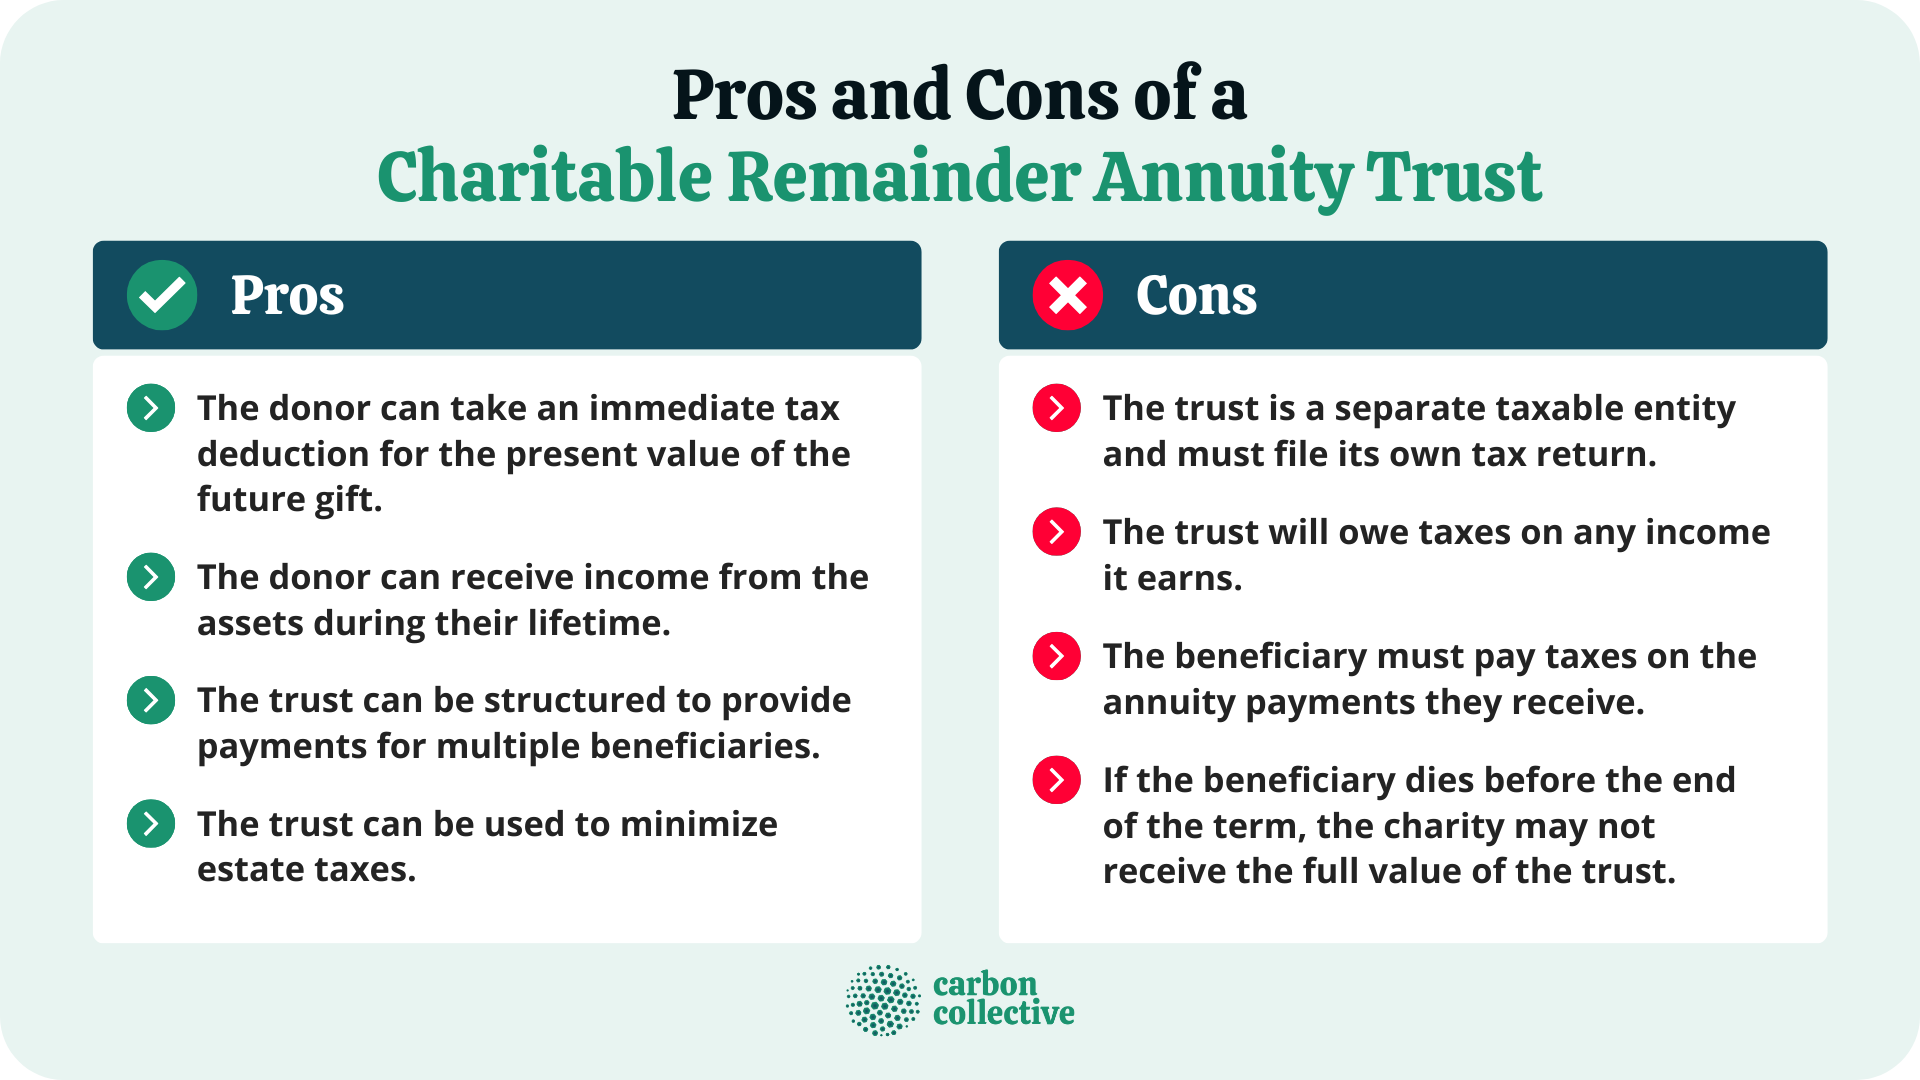 Pros_and_Cons_of_a_Charitable_Remainder_Annuity_Trust